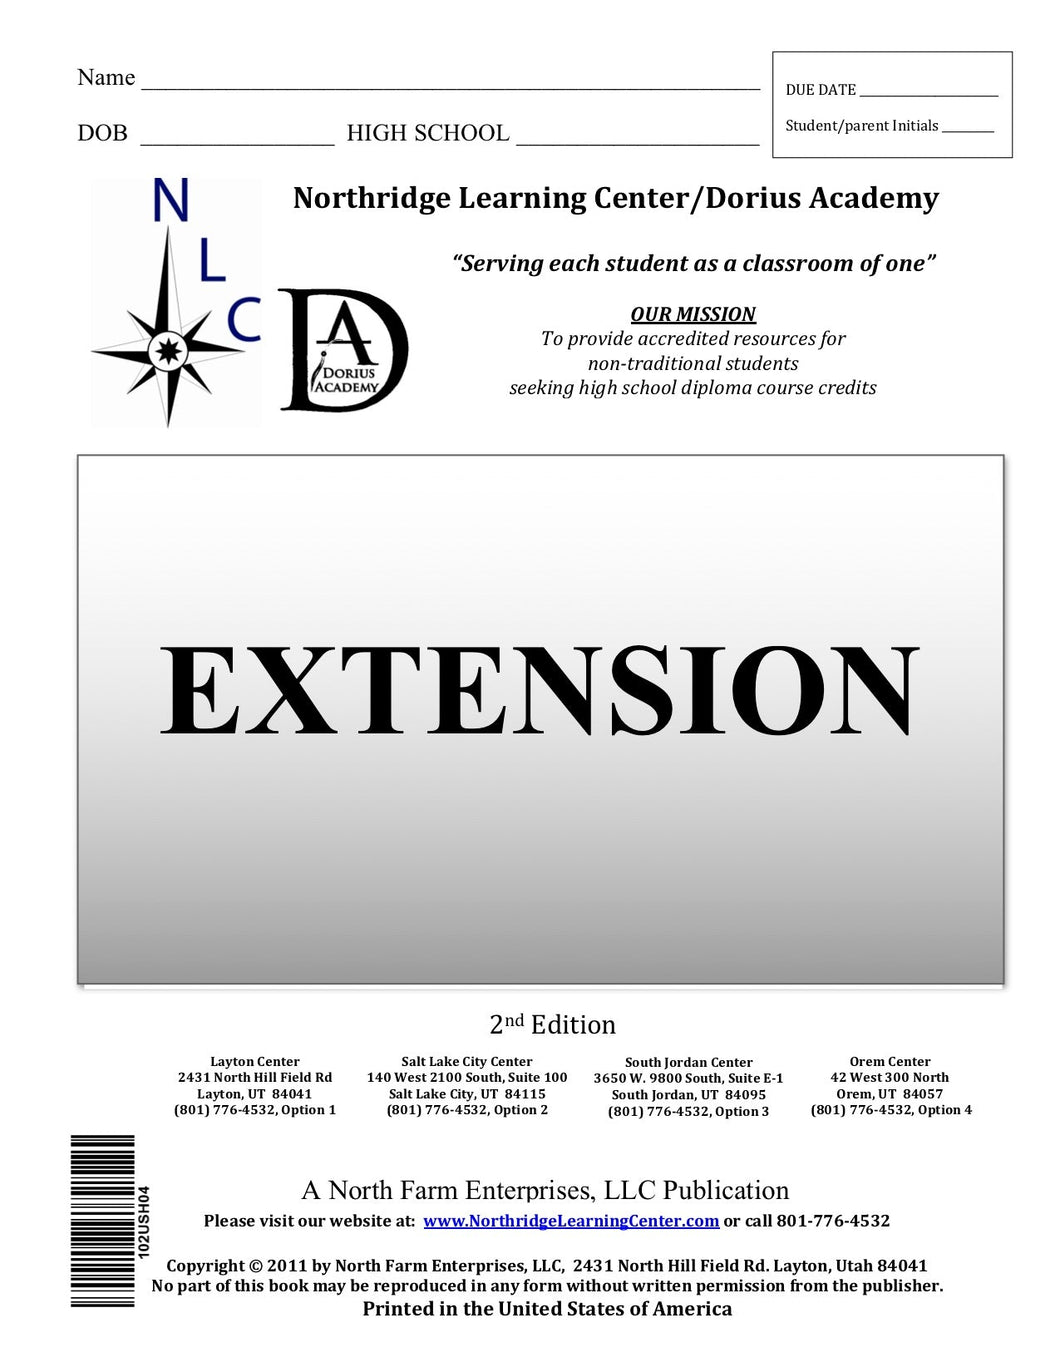 Language Arts 11, Section III - Extension